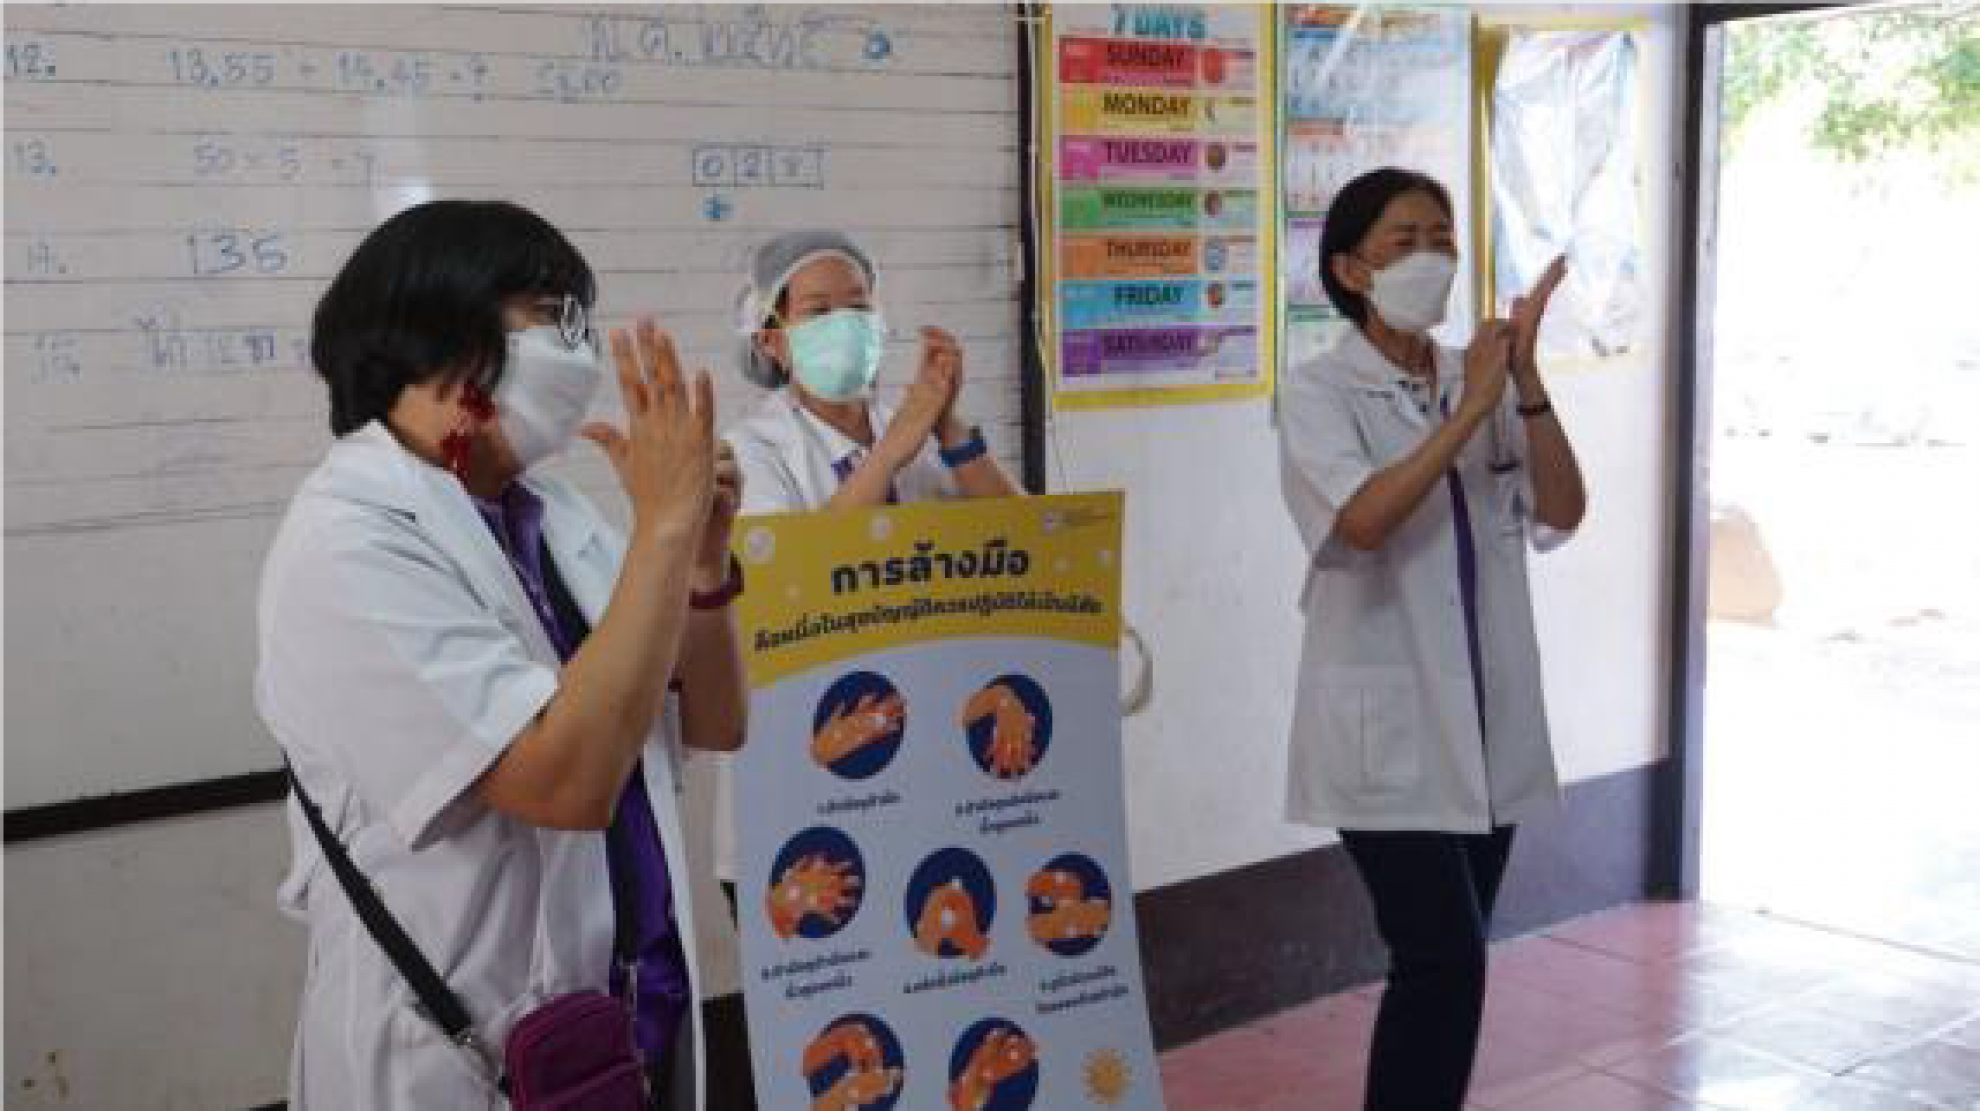 PCMC volunteers provided the modern medical knowledge on ailment prevention and basic self-care. For example, How to perform hand hygiene and tooth brushing techniques